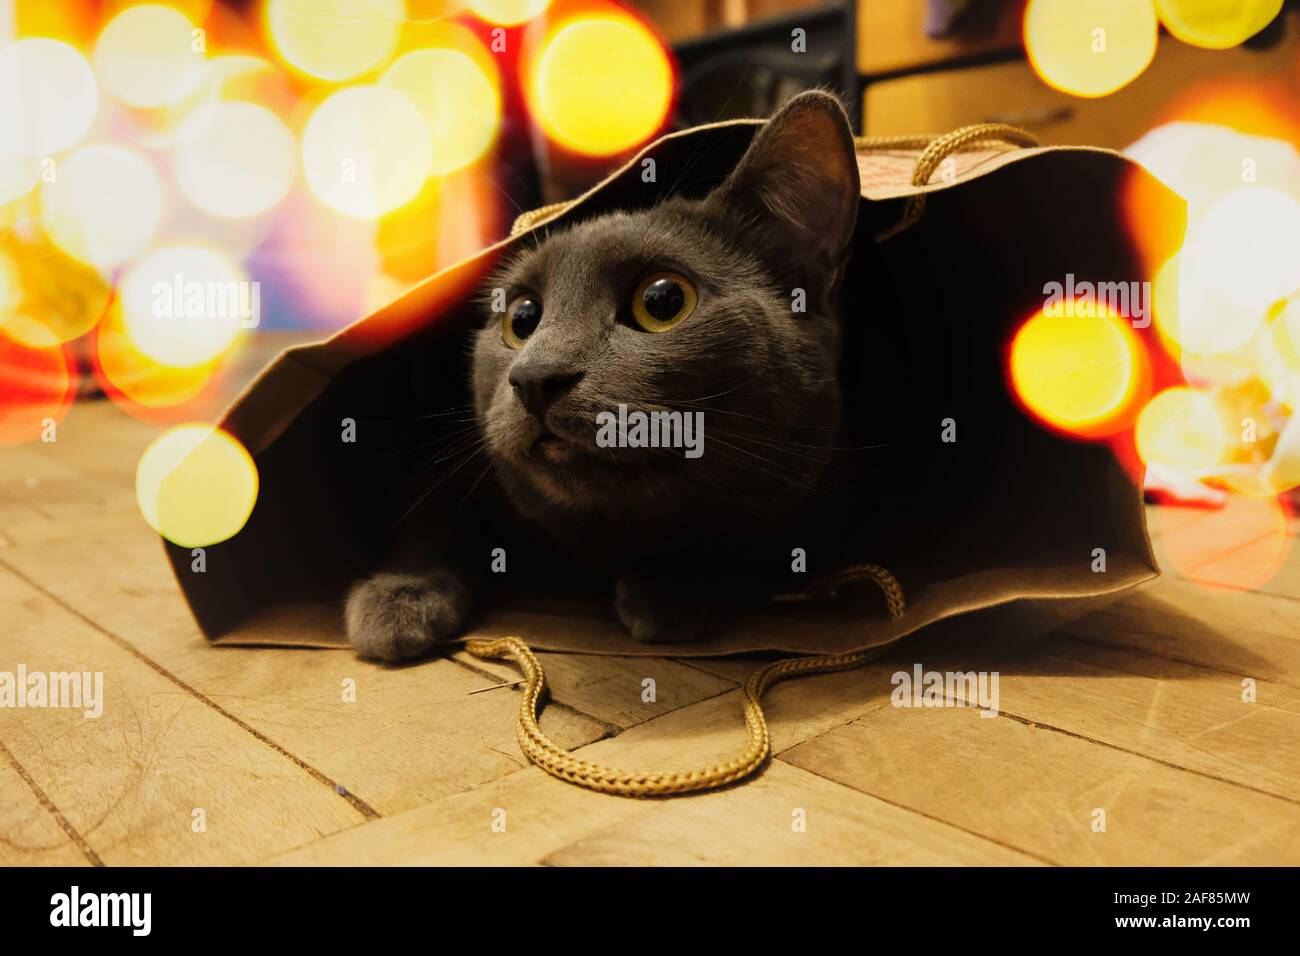 Beautiful Russian blue cat sticking its head out of a paper bag placed on a  wooden floor and surrounded by sparkling lights Stock Photo - Alamy